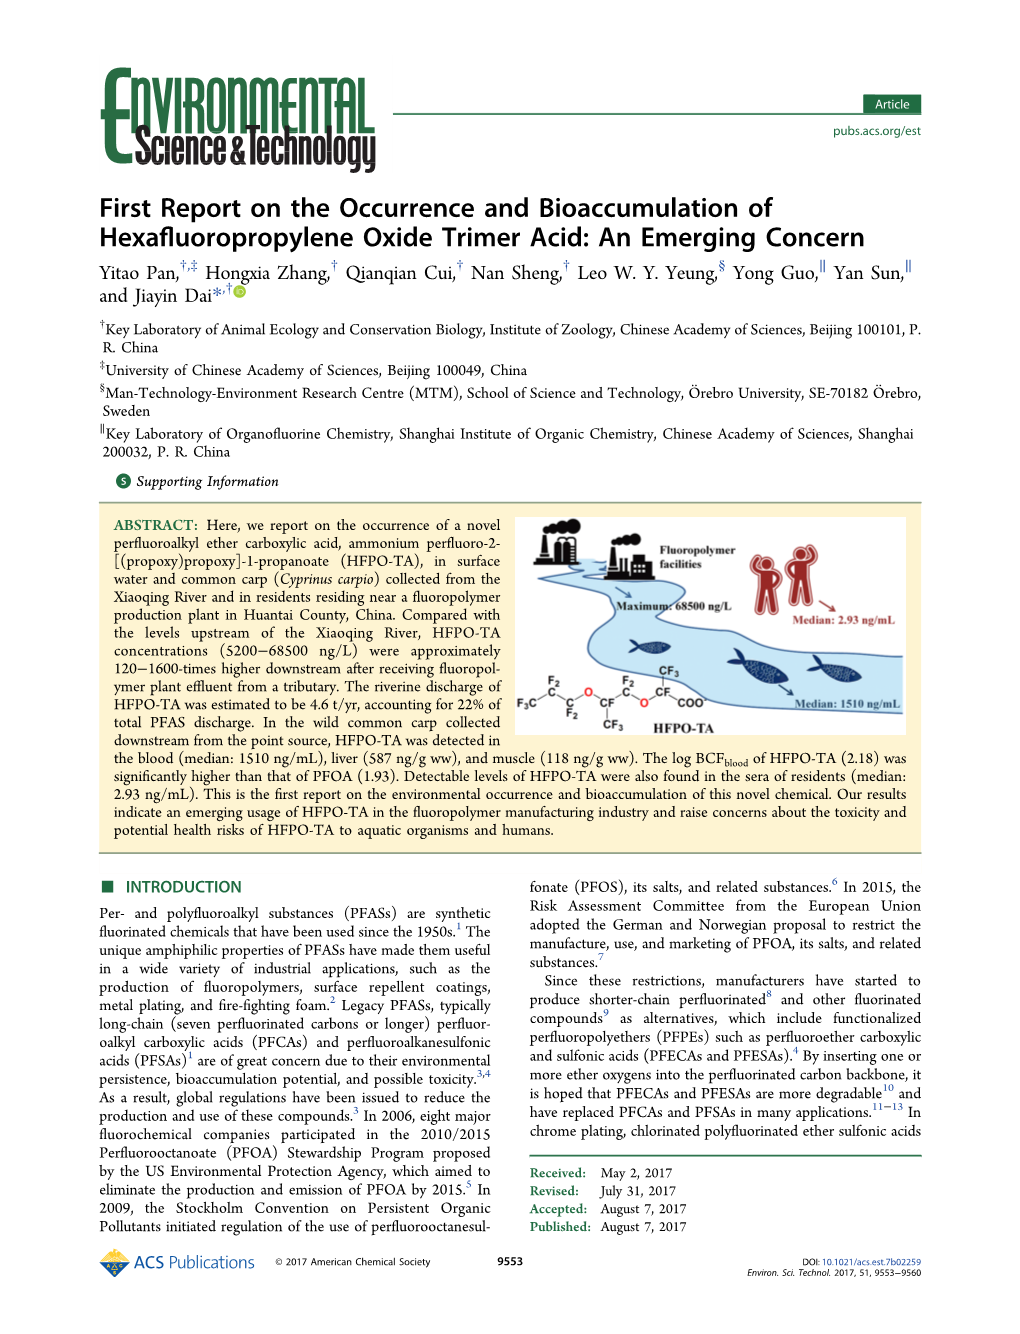 First Report on the Occurrence and Bioaccumulation Of